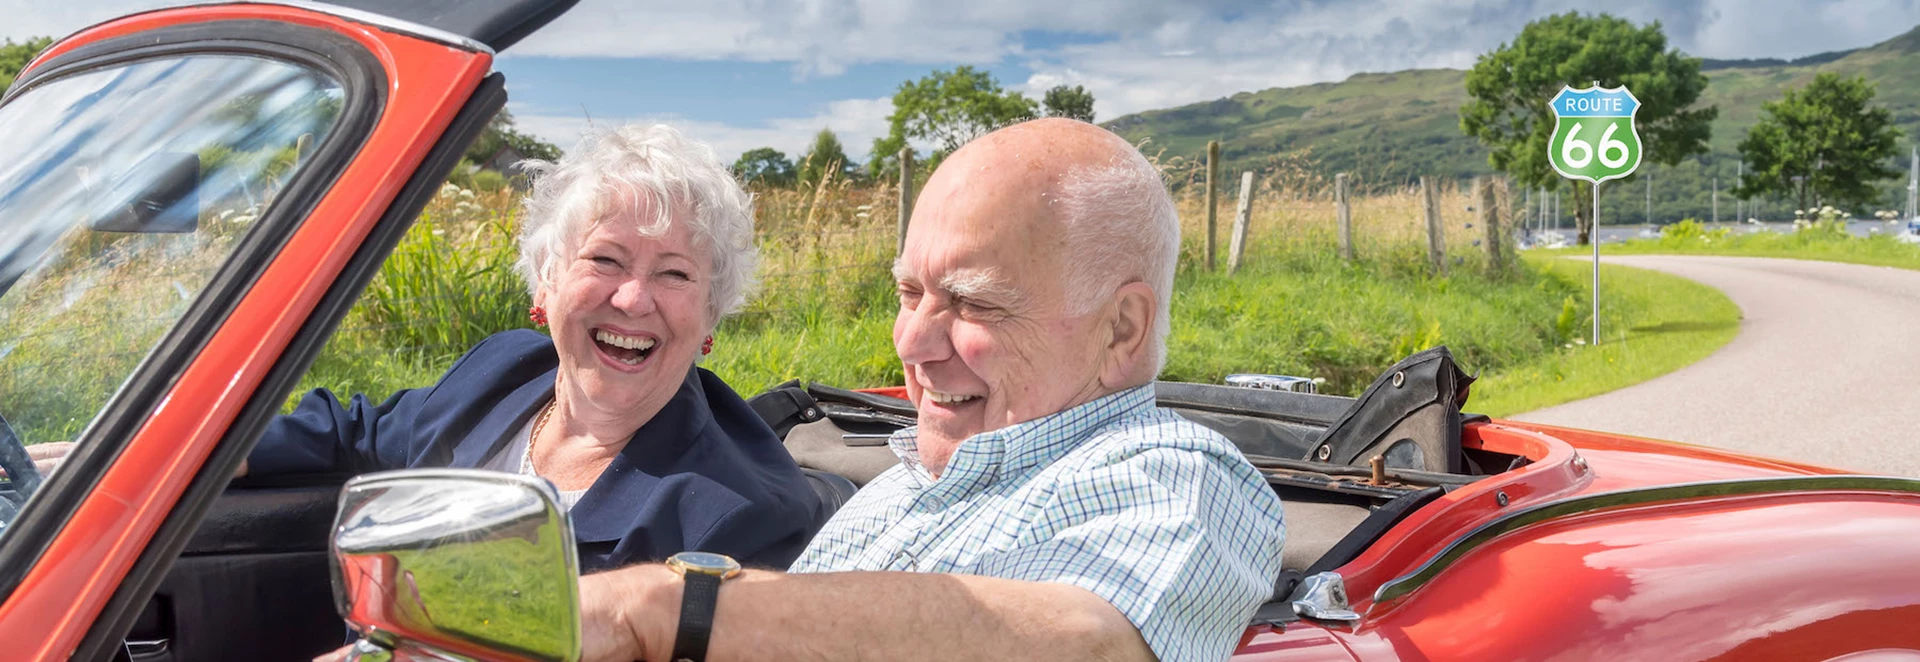 Pensioners maintain confidence on road following retirement 